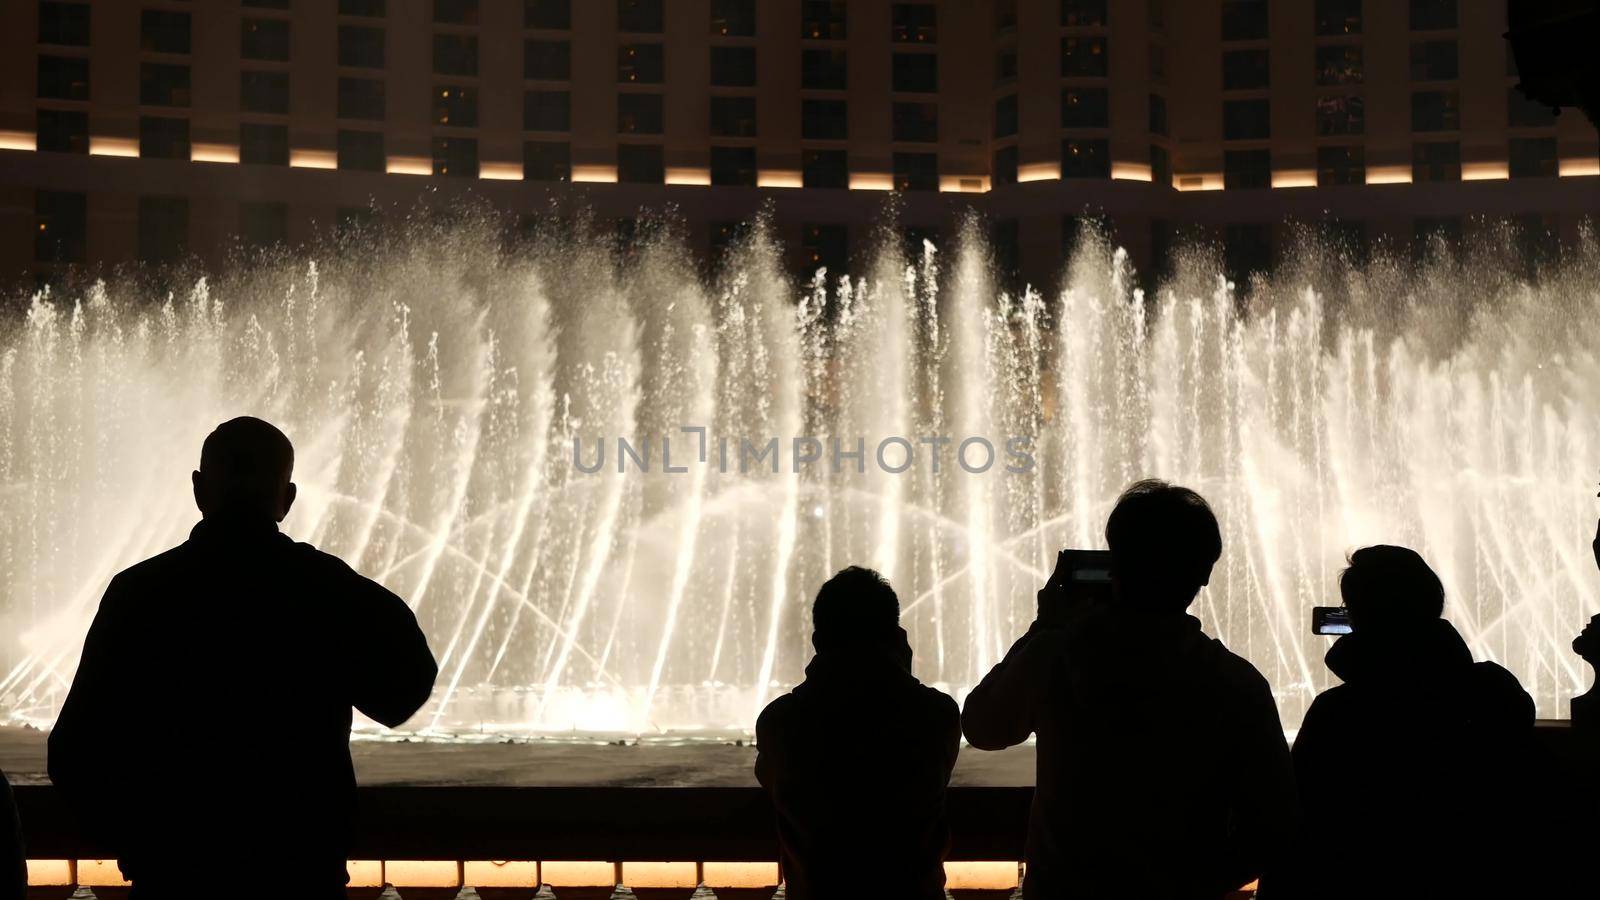 LAS VEGAS, NEVADA USA - 13 DEC 2019: People looking at Bellagio fountain musical performance at night. Contrast silhouettes and glowing dancing splashing water. Entertainment show in gambling city by DogoraSun